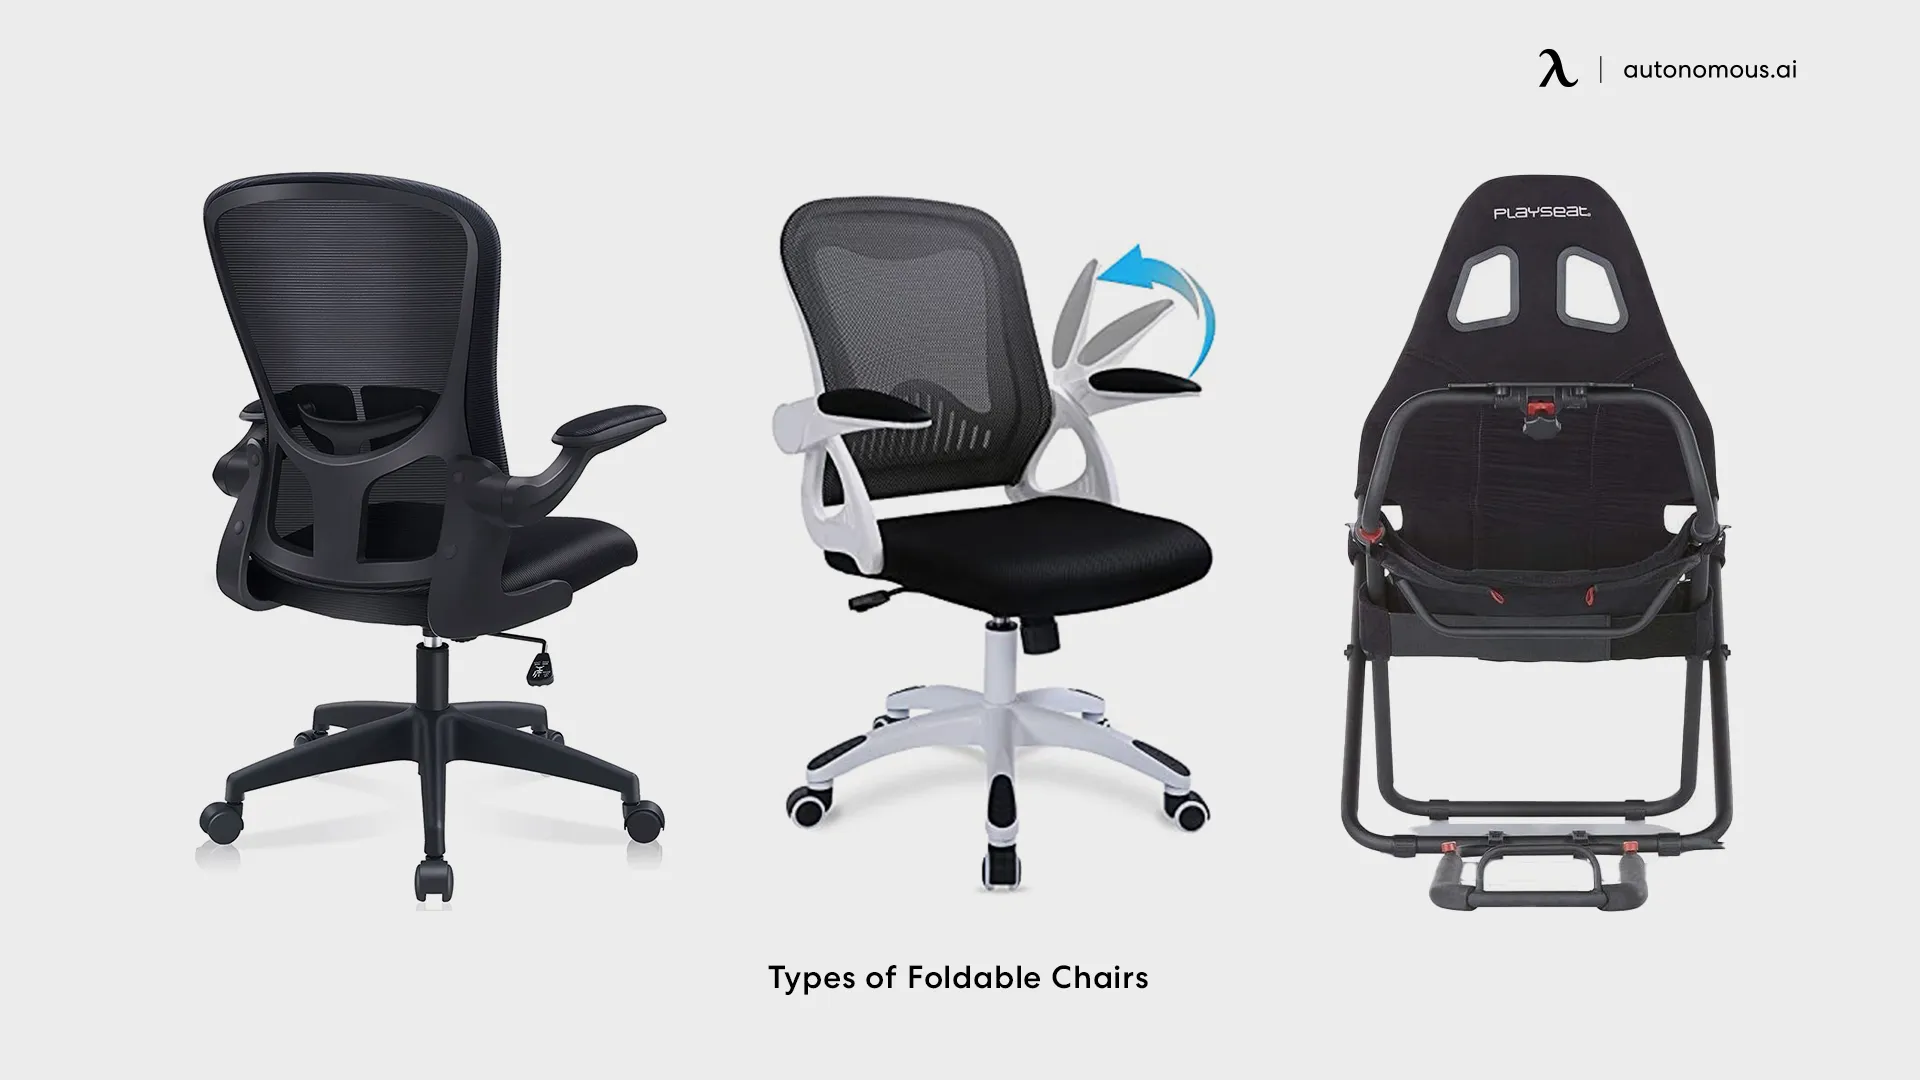 Types of Folding Chairs